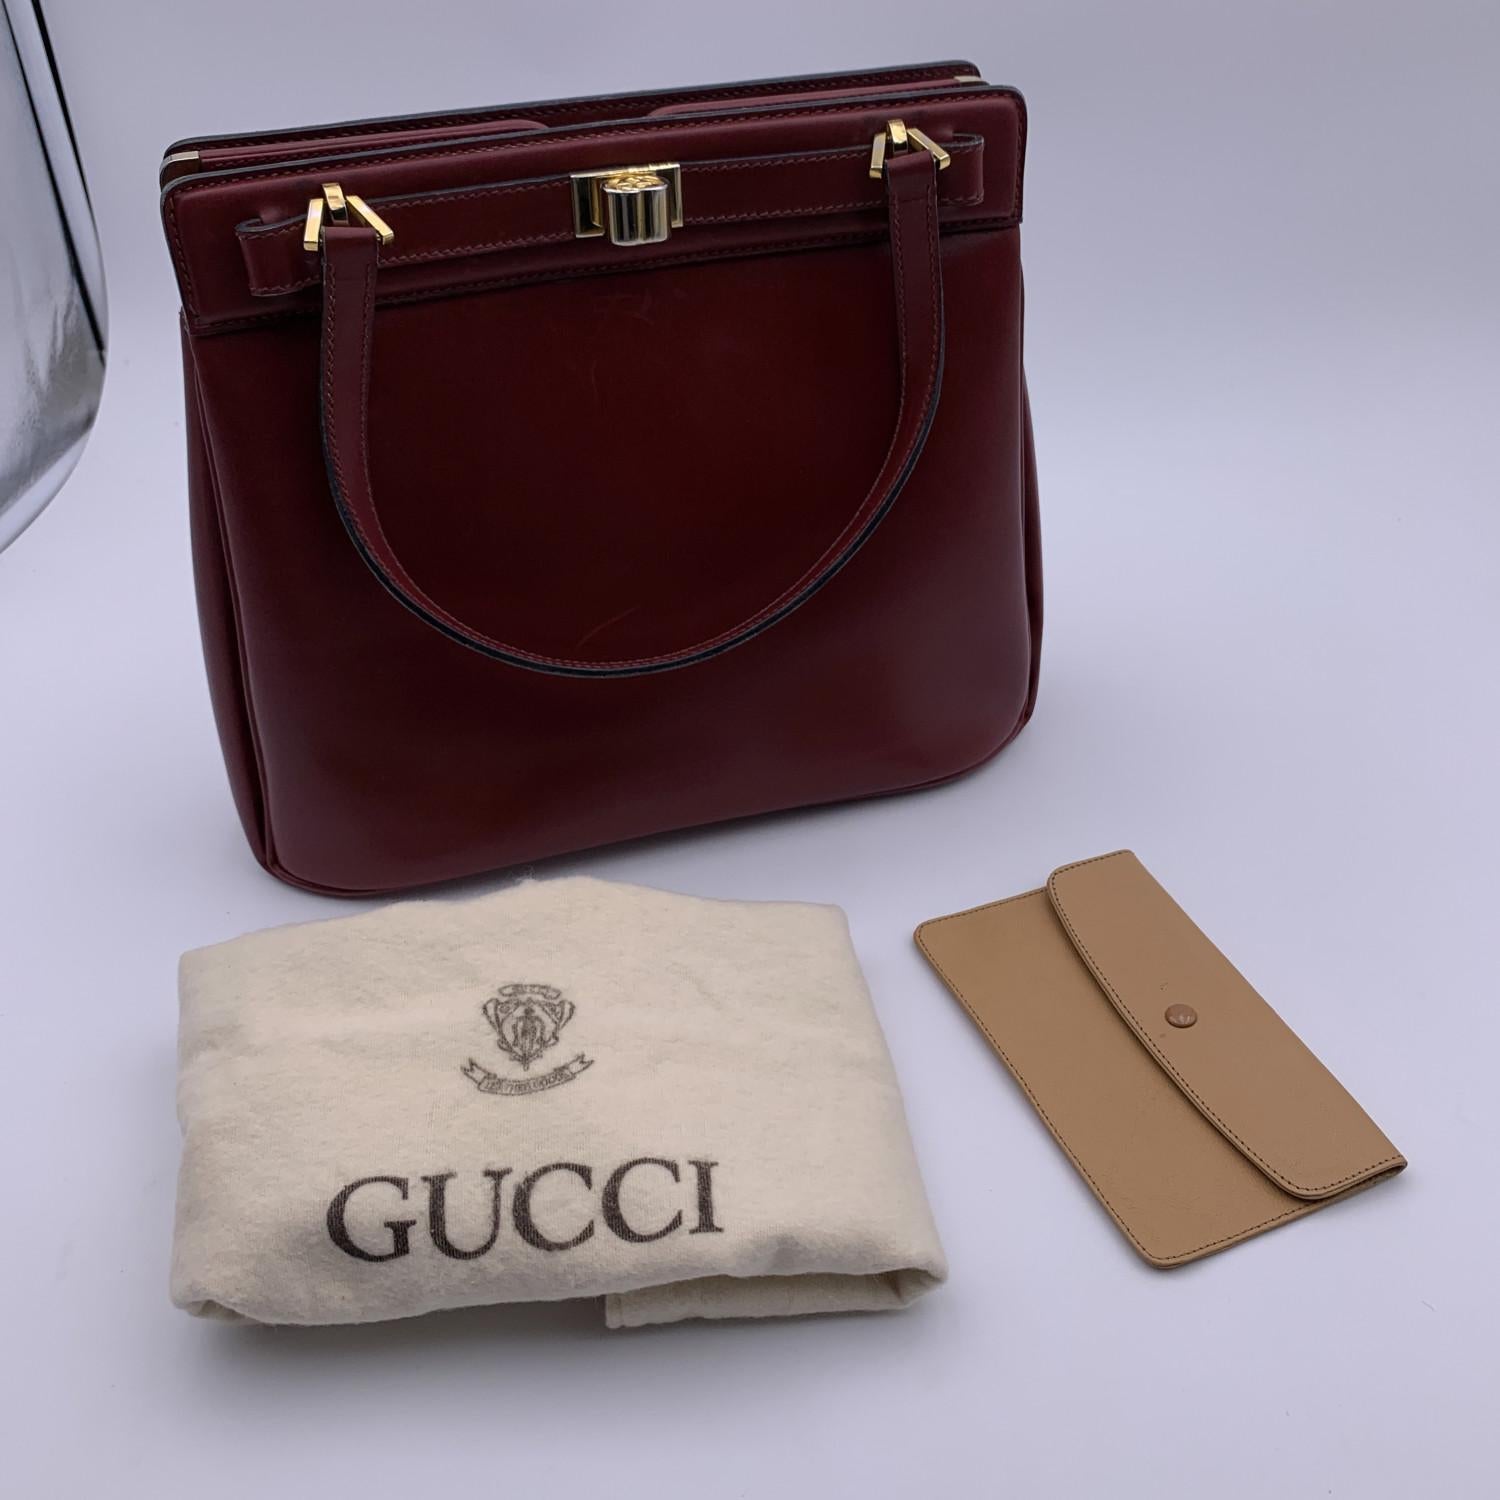 Beautiful Gucci handbag made in burgundy leather with gold metal hardware. Front turn lock closure. Tan leather lining. 2 main sections inside 3 side open pocket, 1 lipstick holder, 1 side zip pocket and 1 leather removable pouch. 'Made in Italy by